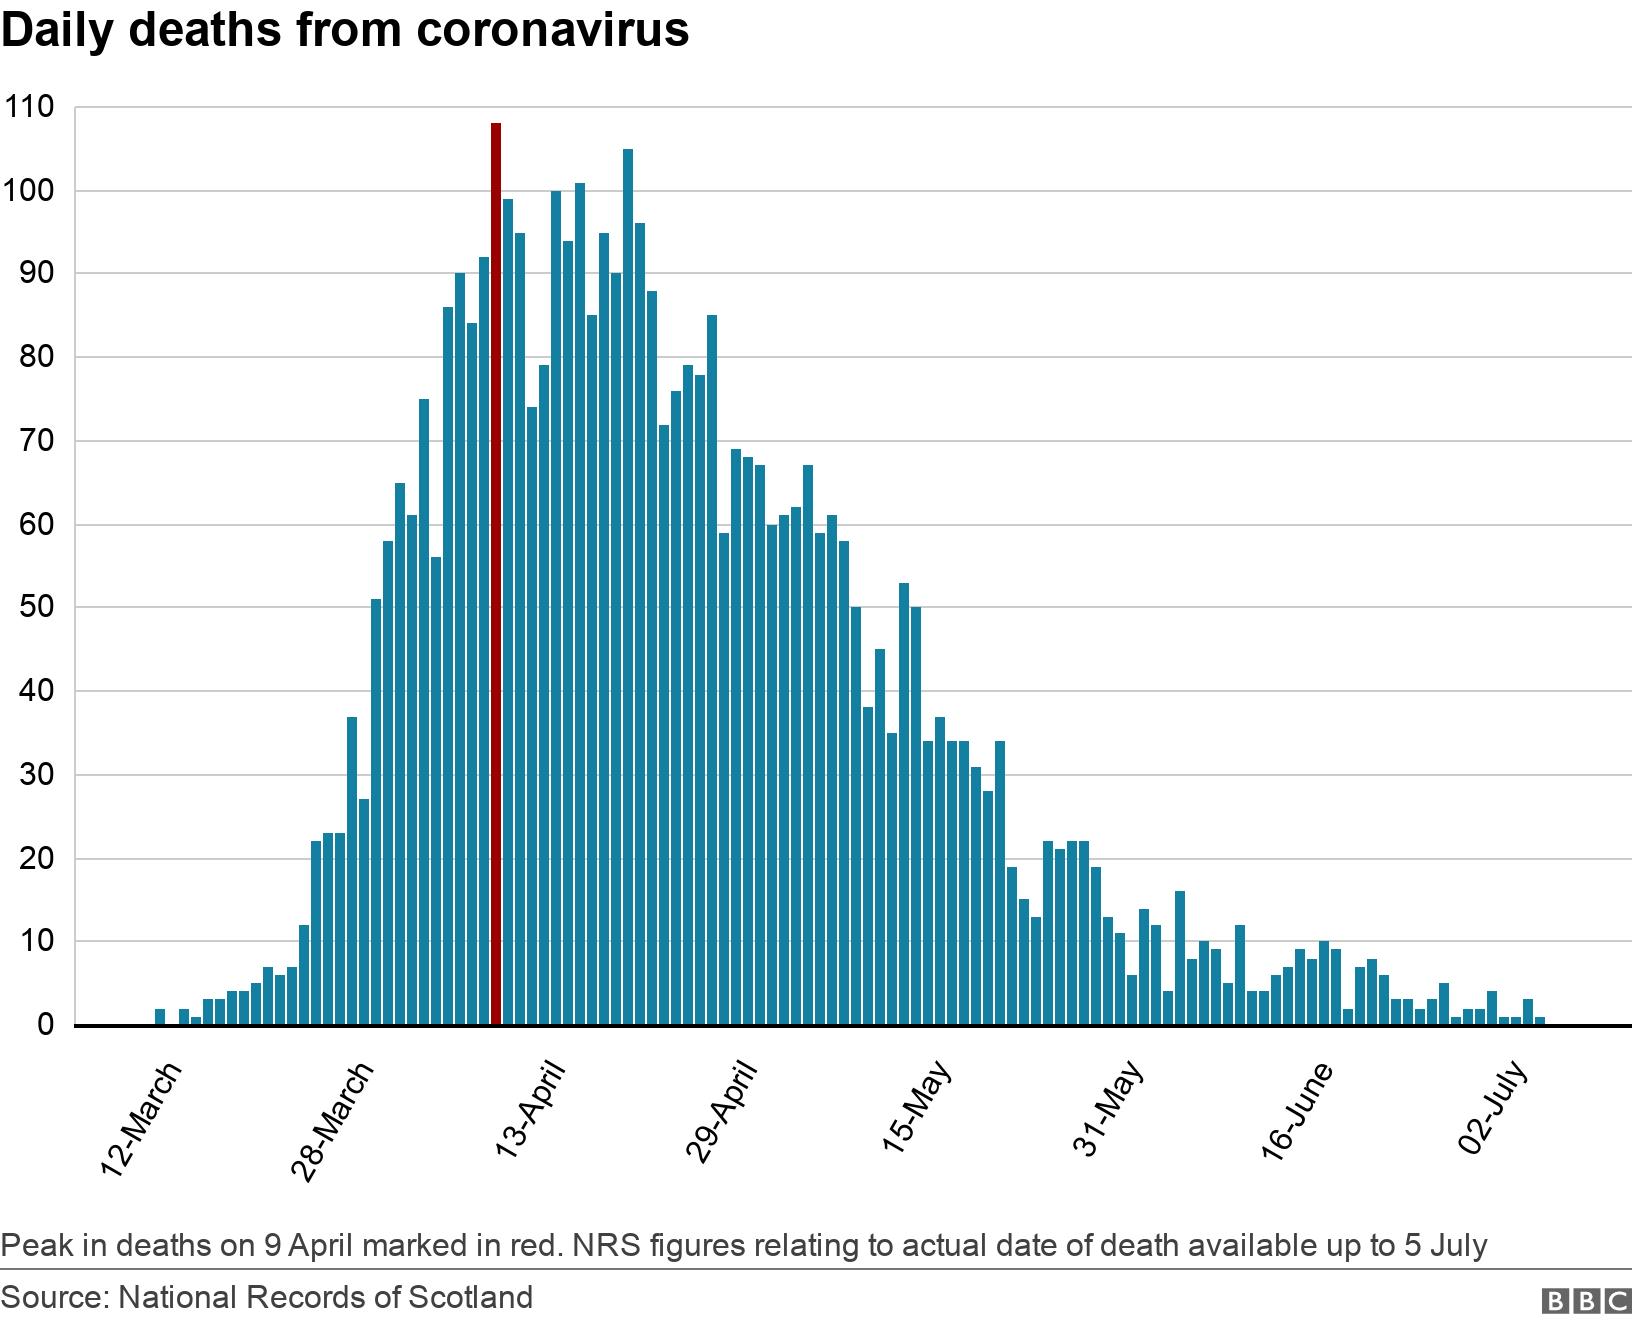 Daily deaths from coronavirus. .  Peak in deaths on 9 April marked in red. NRS figures relating to actual date of death available up to 5 July.